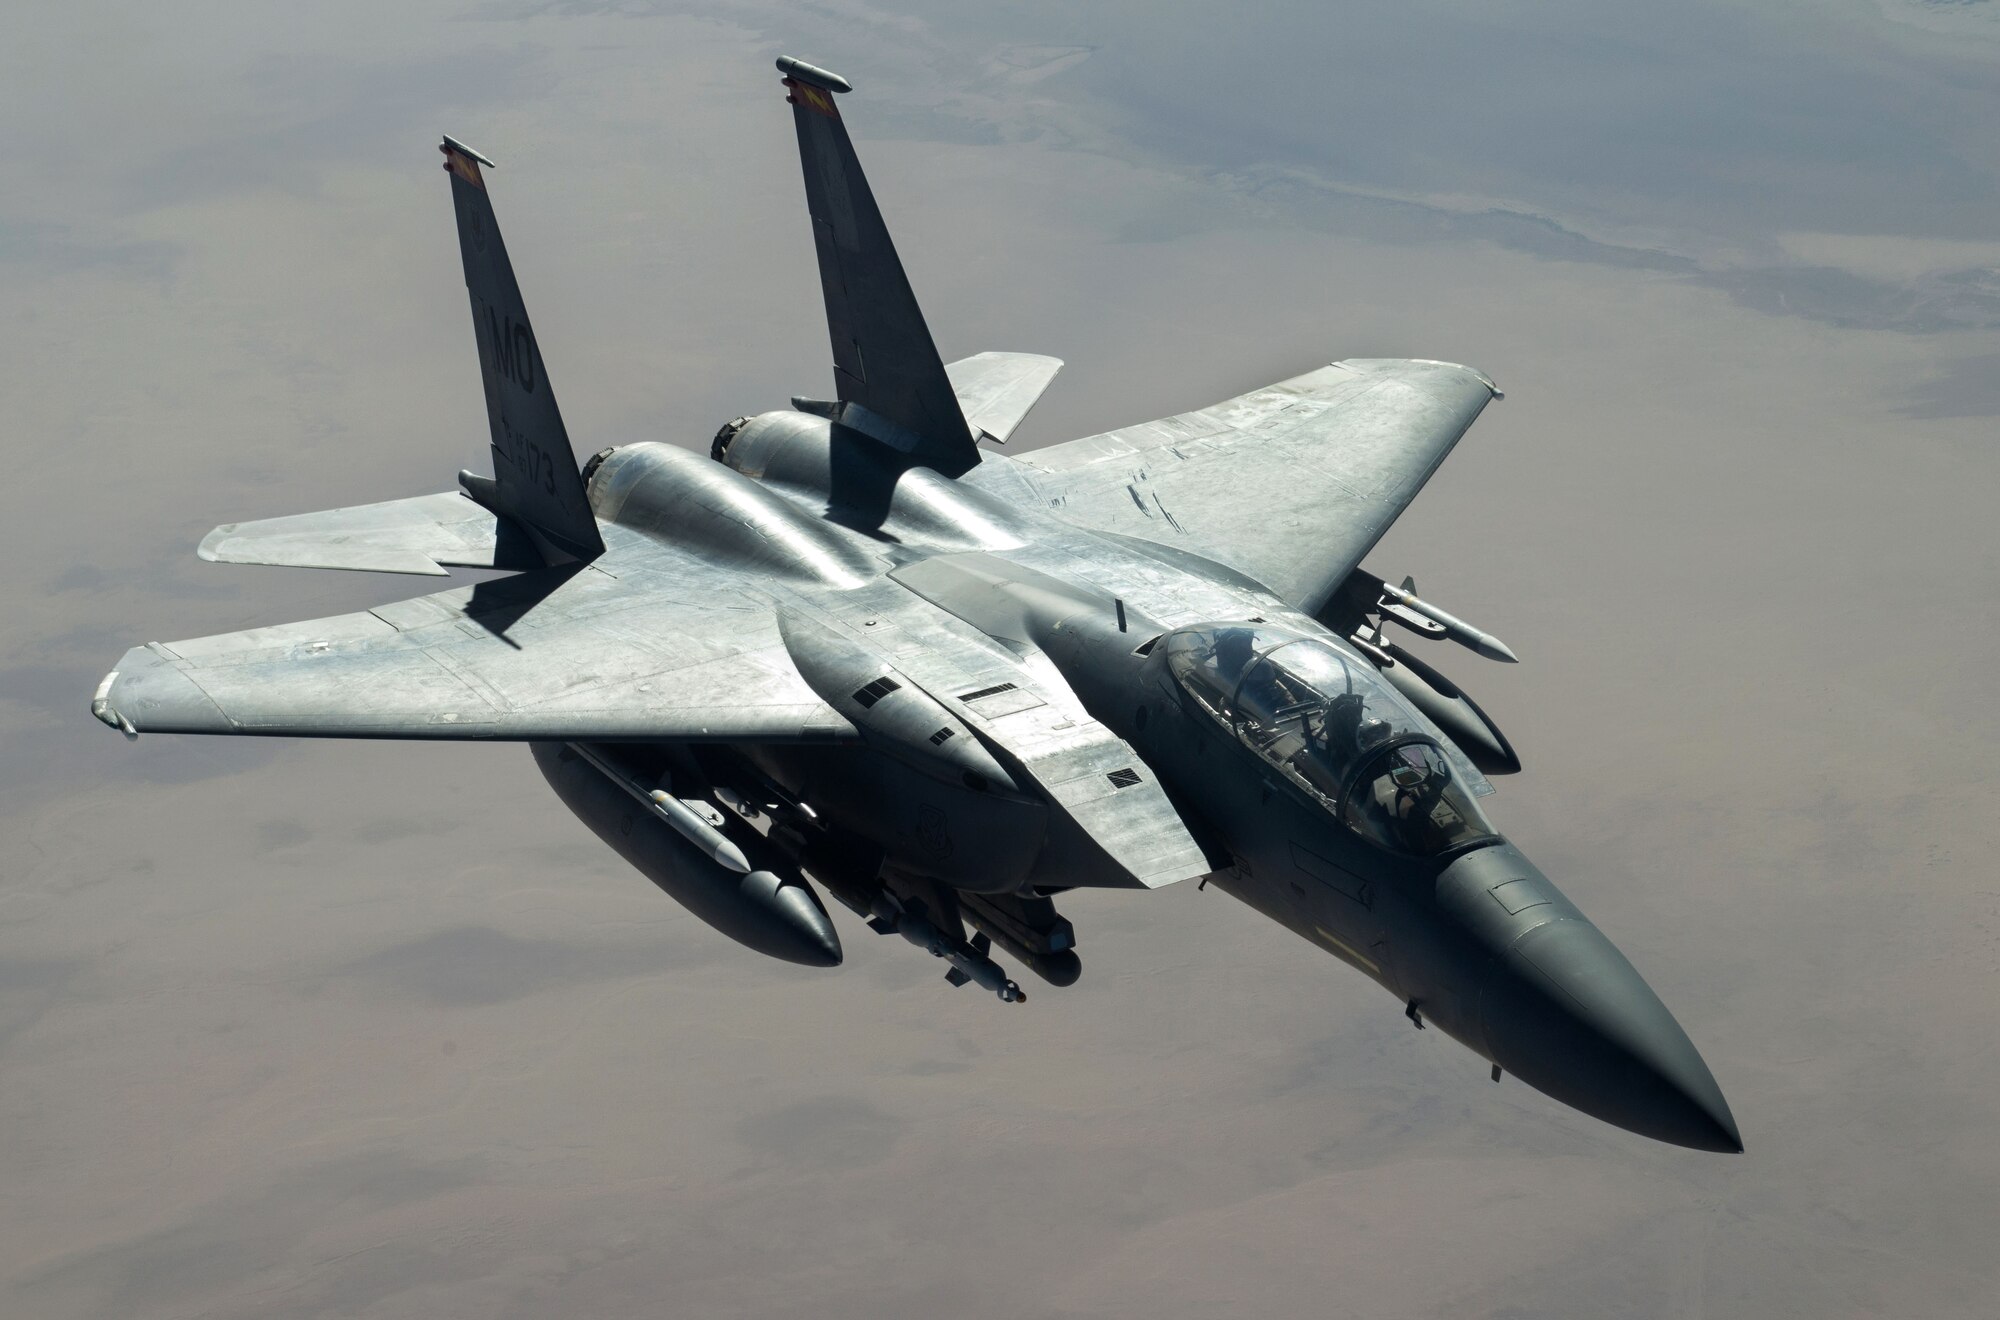 A U.S. Air Force F-15E Strike Eagle rejoins formation after refueling in support of Operation Inherent Resolve near Mosul, Iraq, Nov. 20, 2016. The OIR mission is to militarily defeat Da’esh in the Combined Joint Operations Area in order to enable whole-of-coalition governmental actions to increase regional stability. (U.S. Air Force photo by Staff Sgt. R. Alex Durbin)